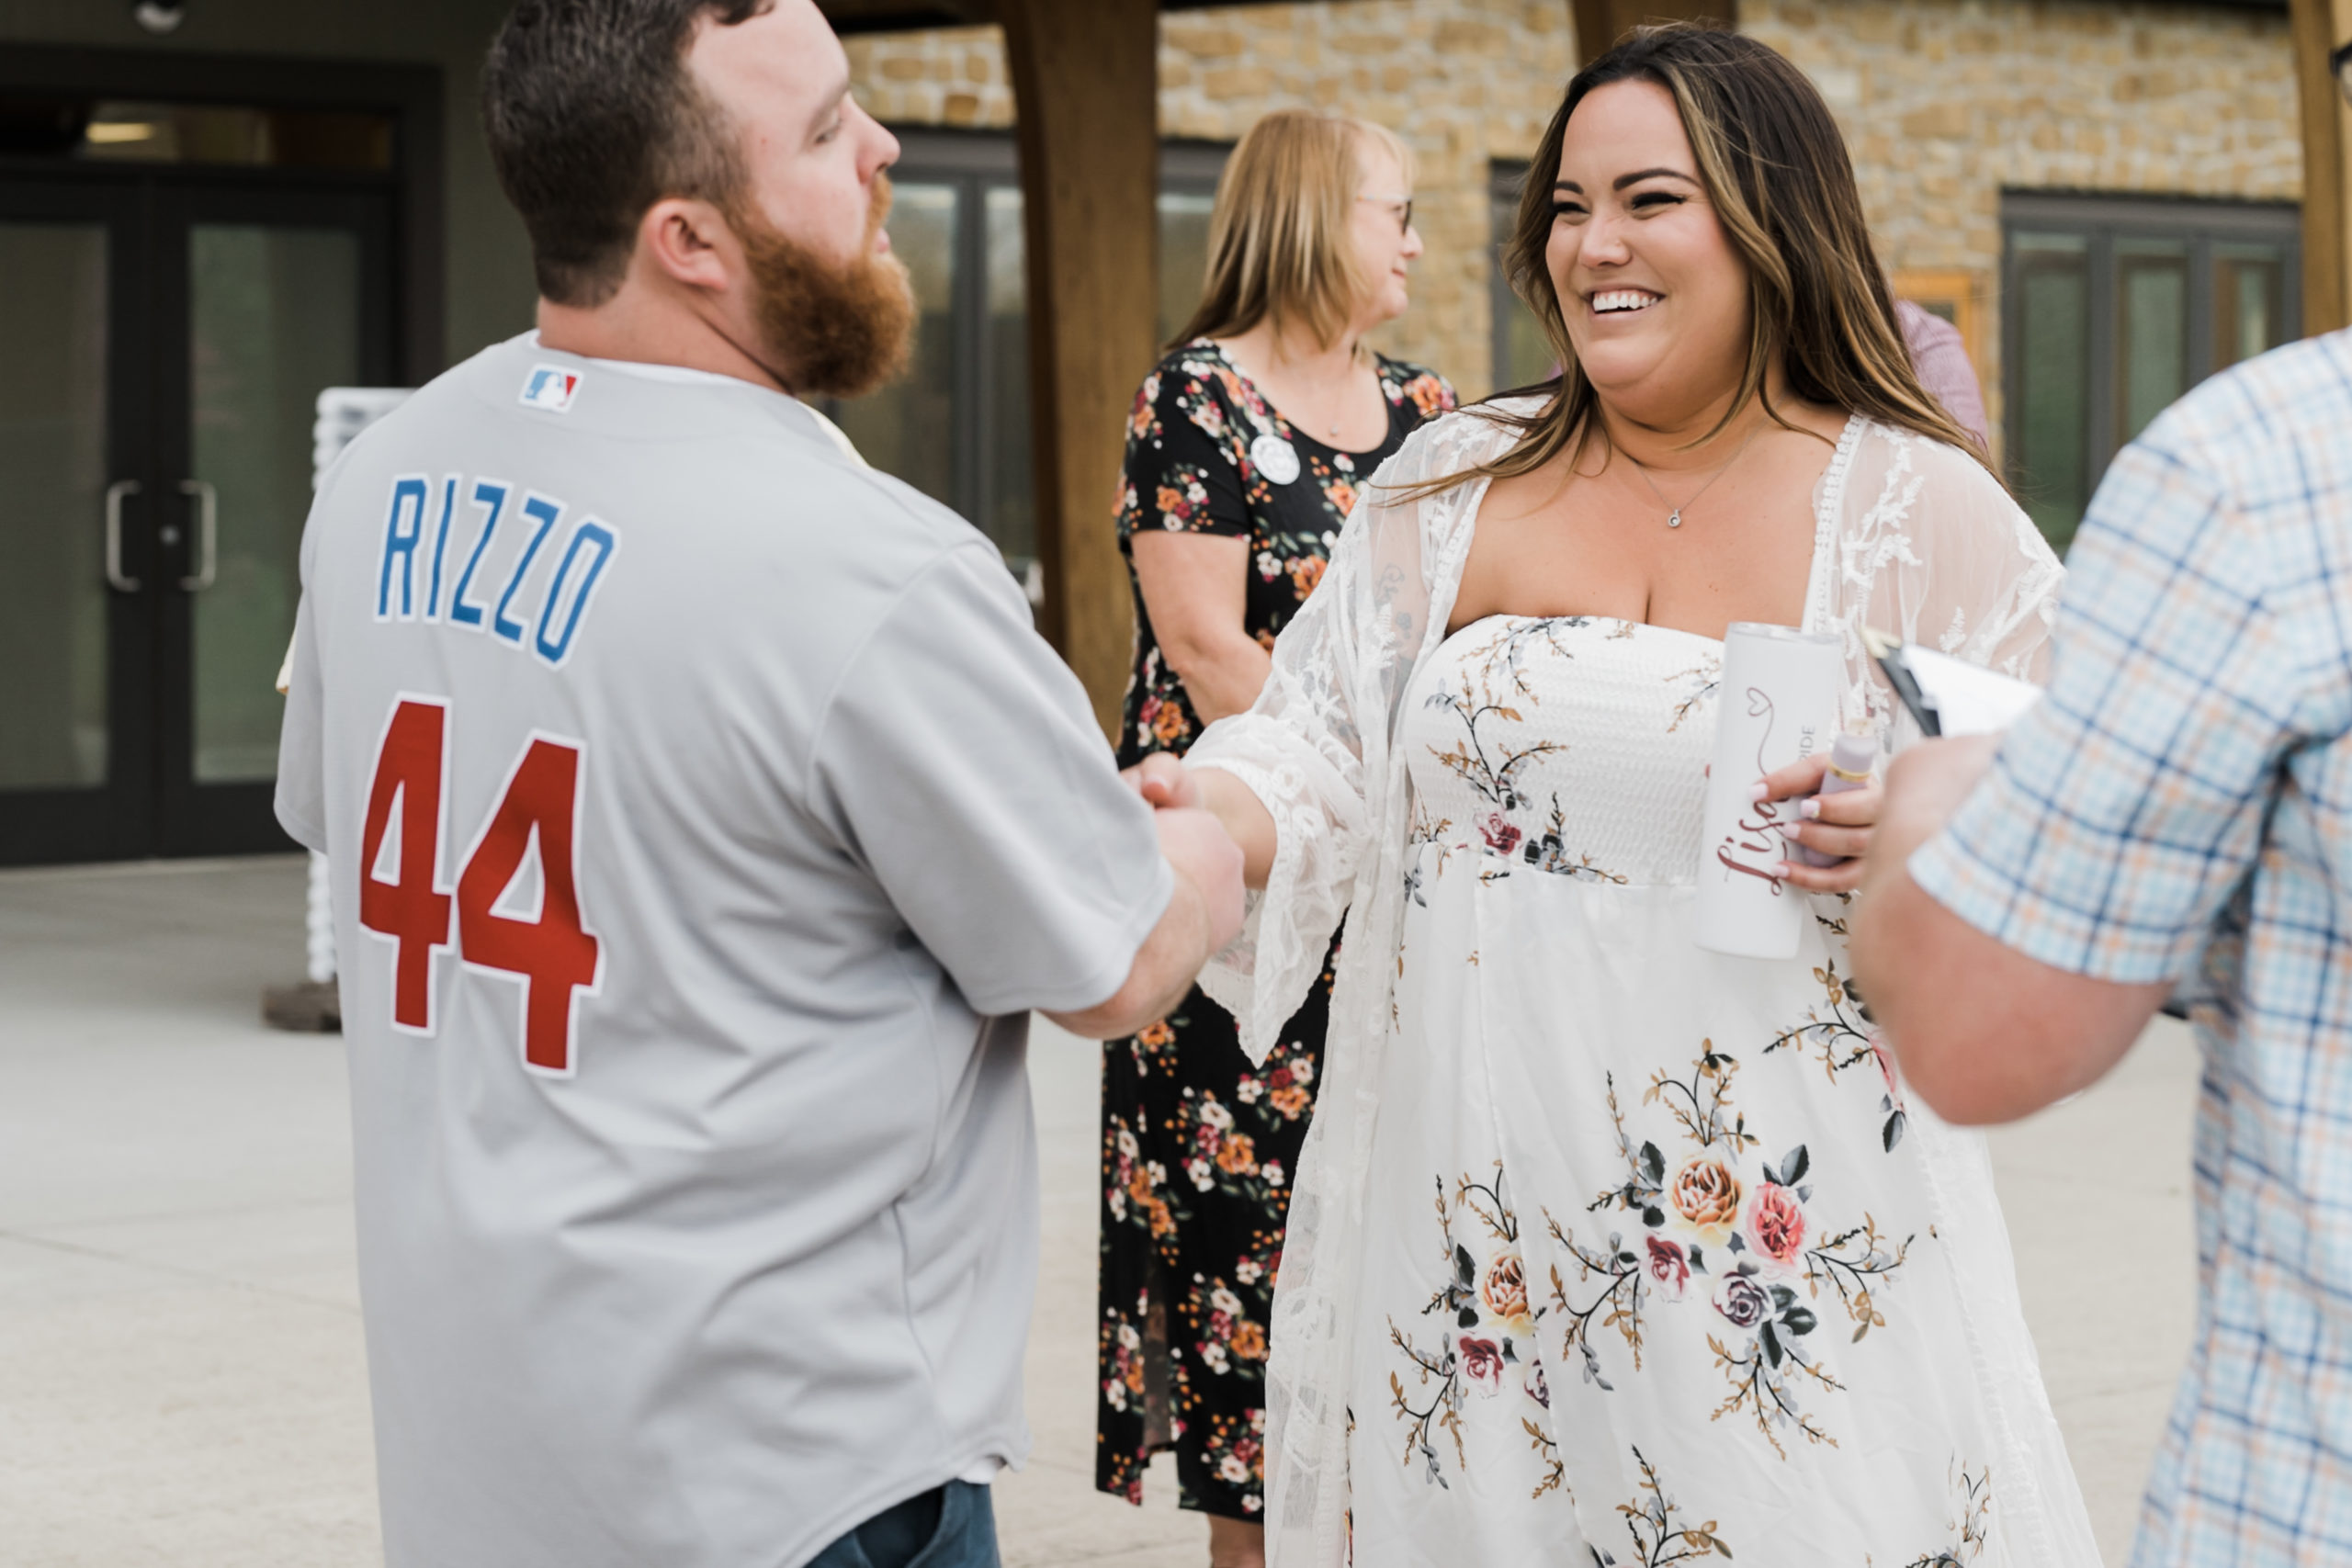 Indianapolis rehearsal dinner covered by wedding photographer